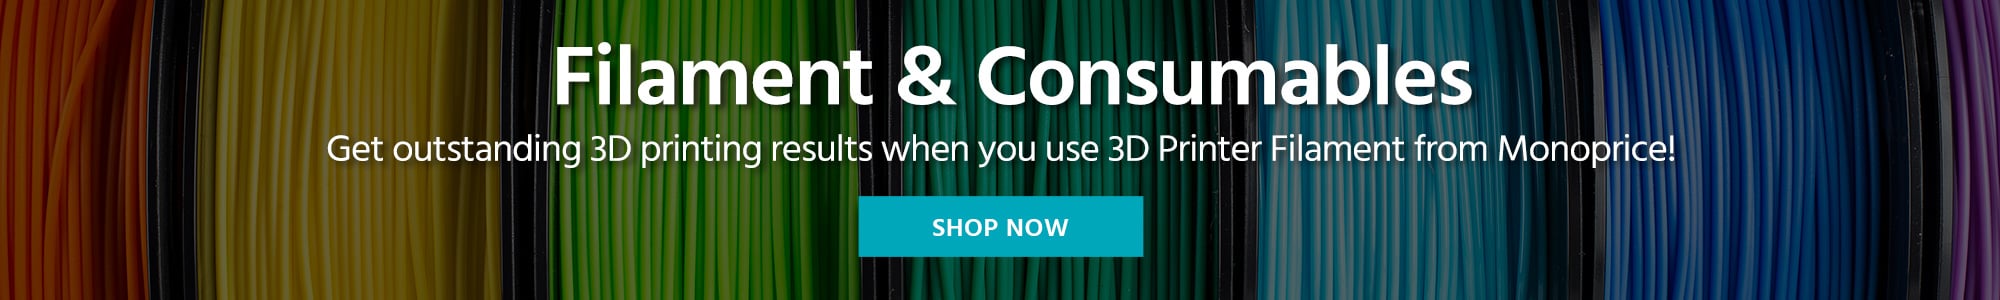 Get outstanding 3D printing results when you use 3D Printer Filament from Monoprice! Get <b>Free Standard US Shipping on filament orders of $39+